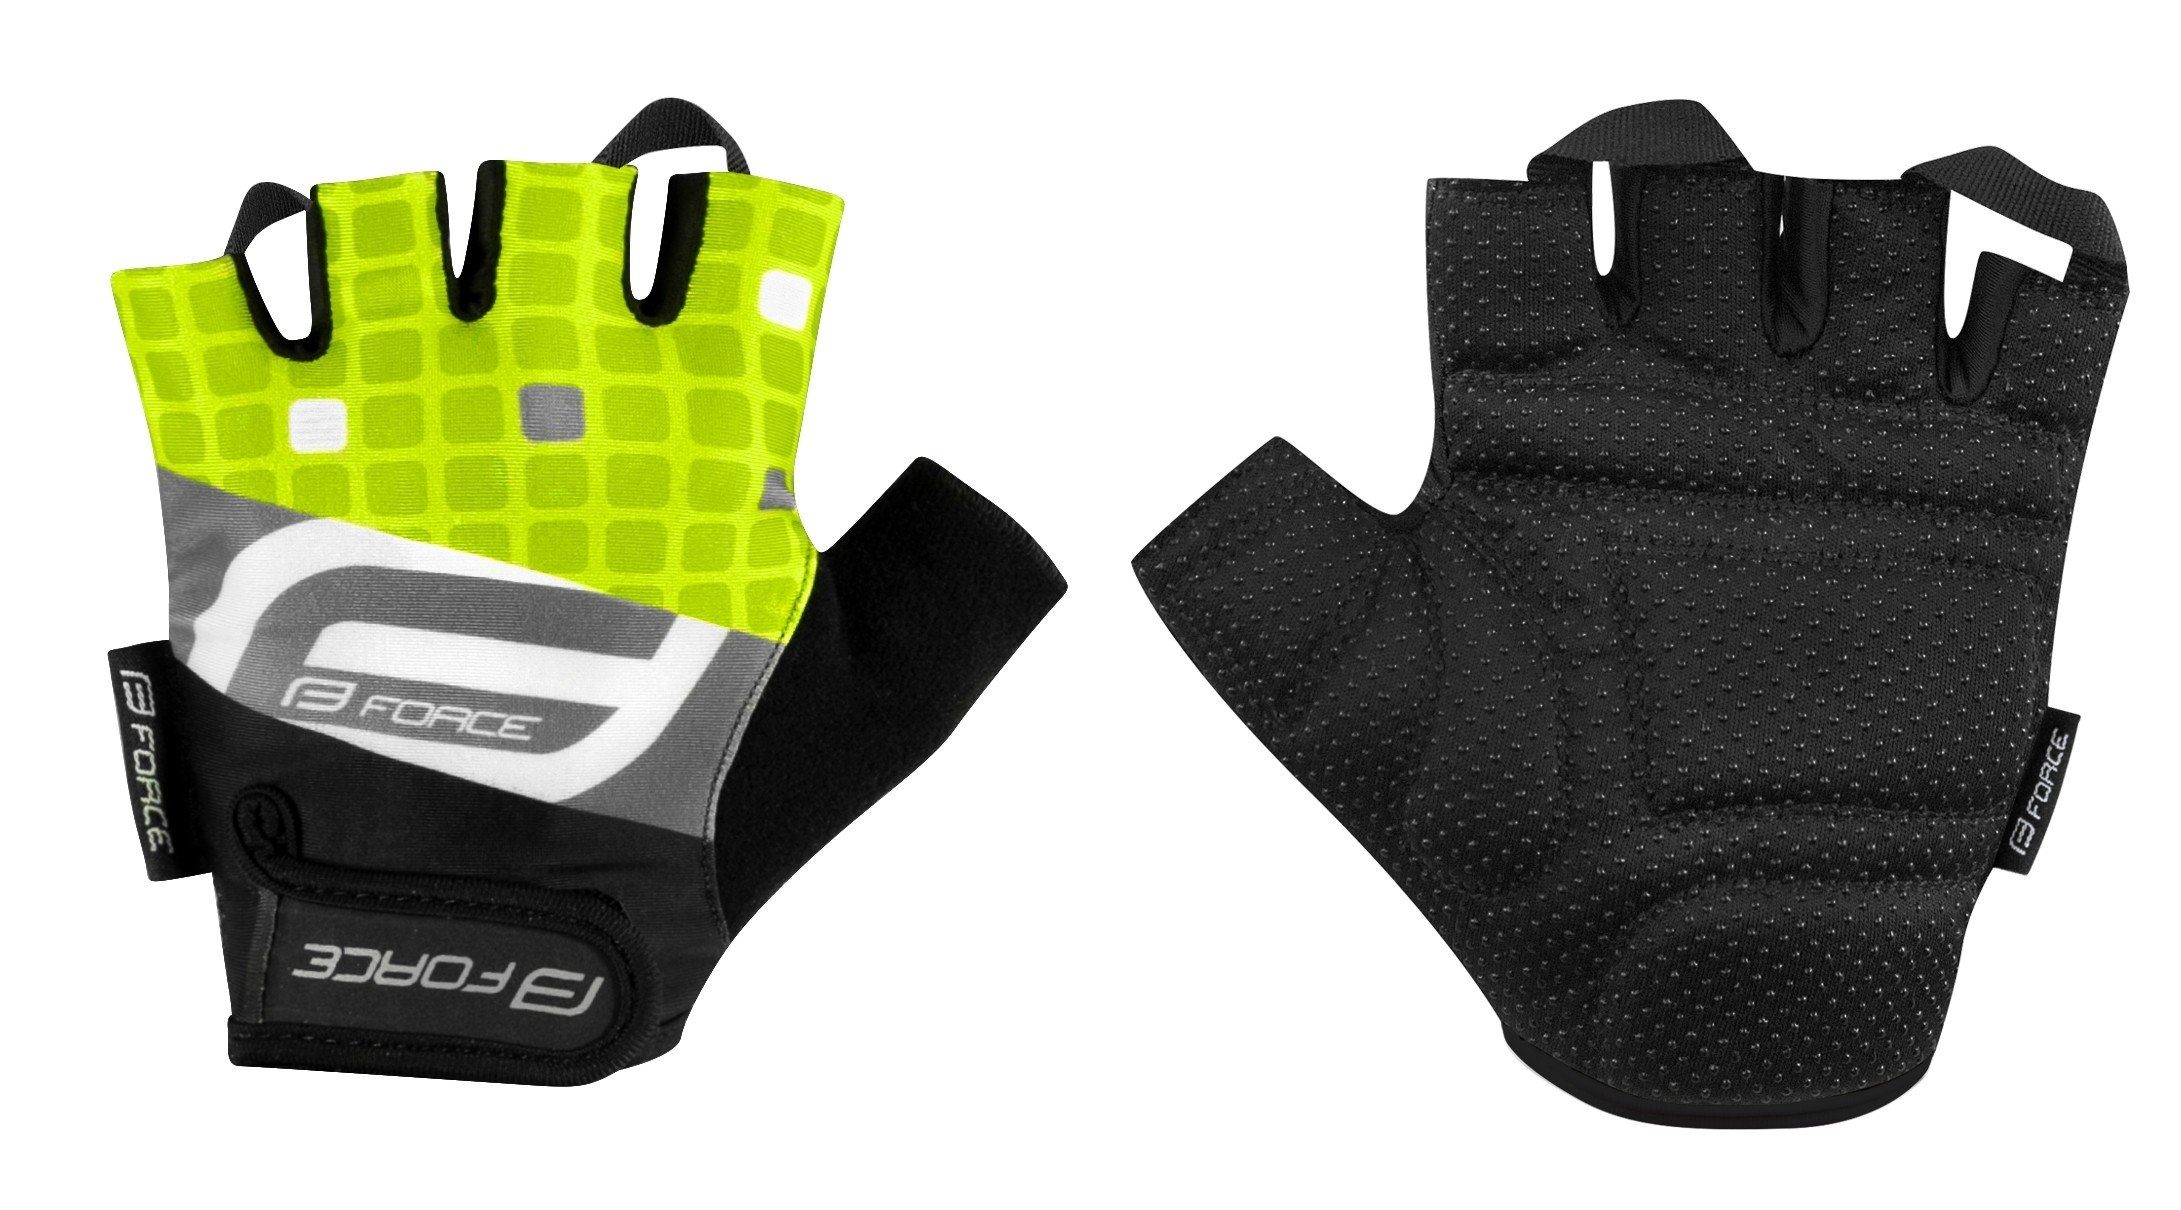 FORCE SQUARE Handschuhe FORCE Fahrradhandschuhe fluo